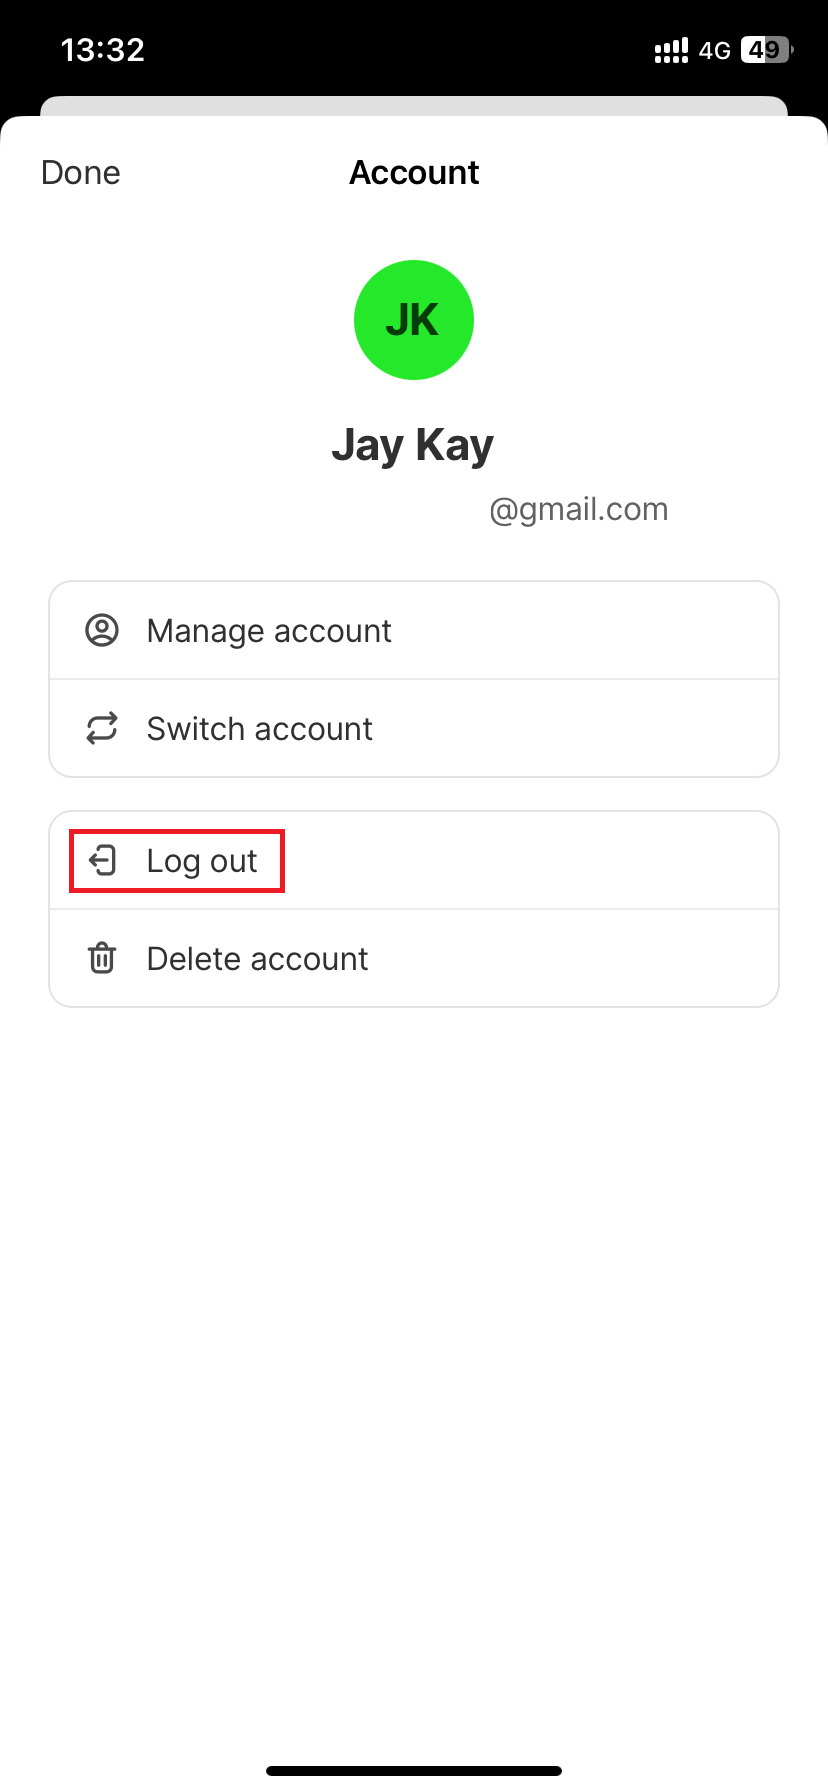 select “Log out”